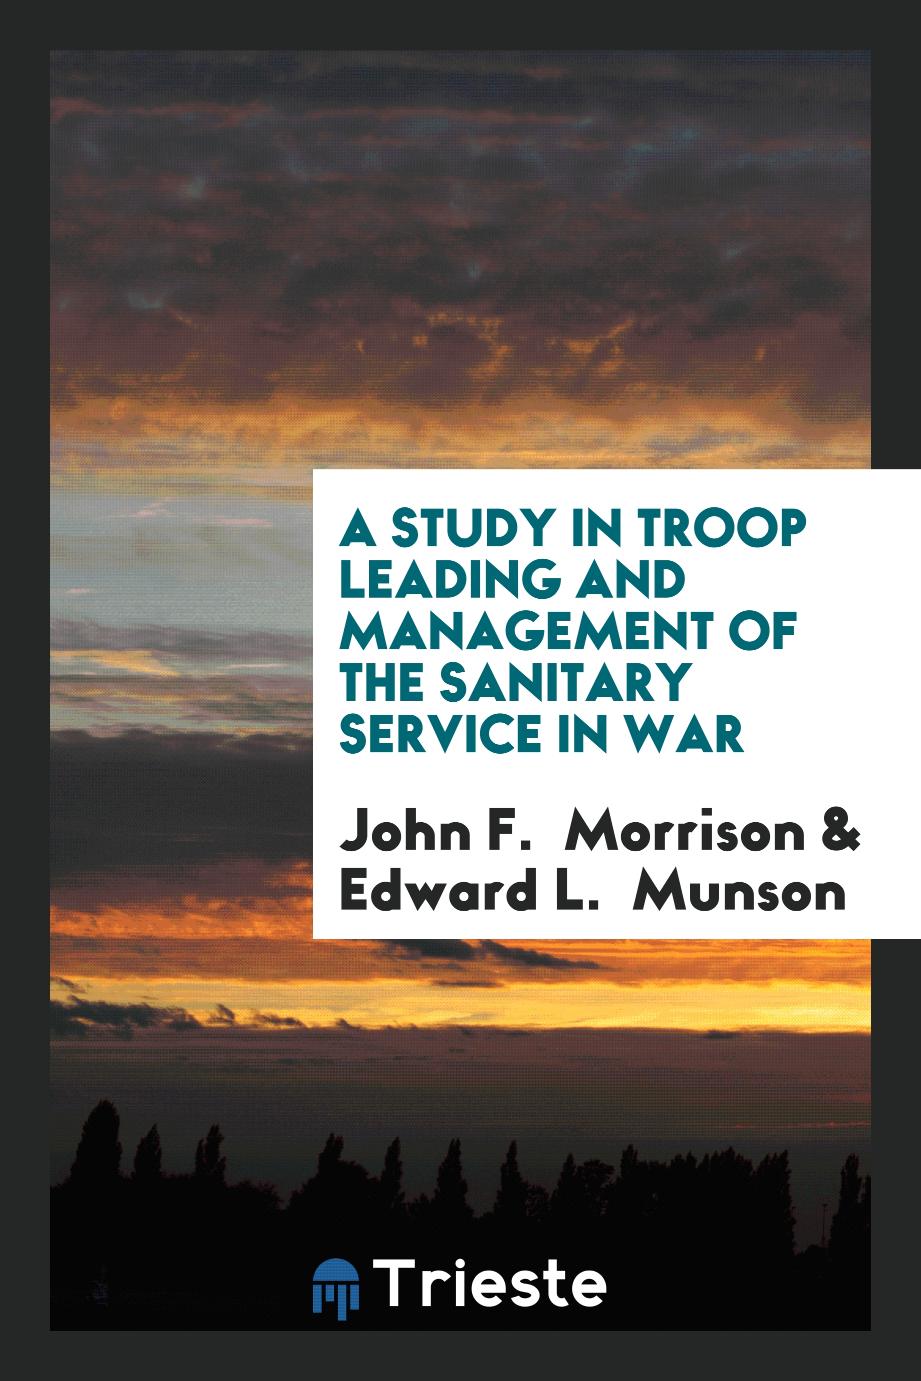 A Study in Troop Leading and Management of the Sanitary Service in War